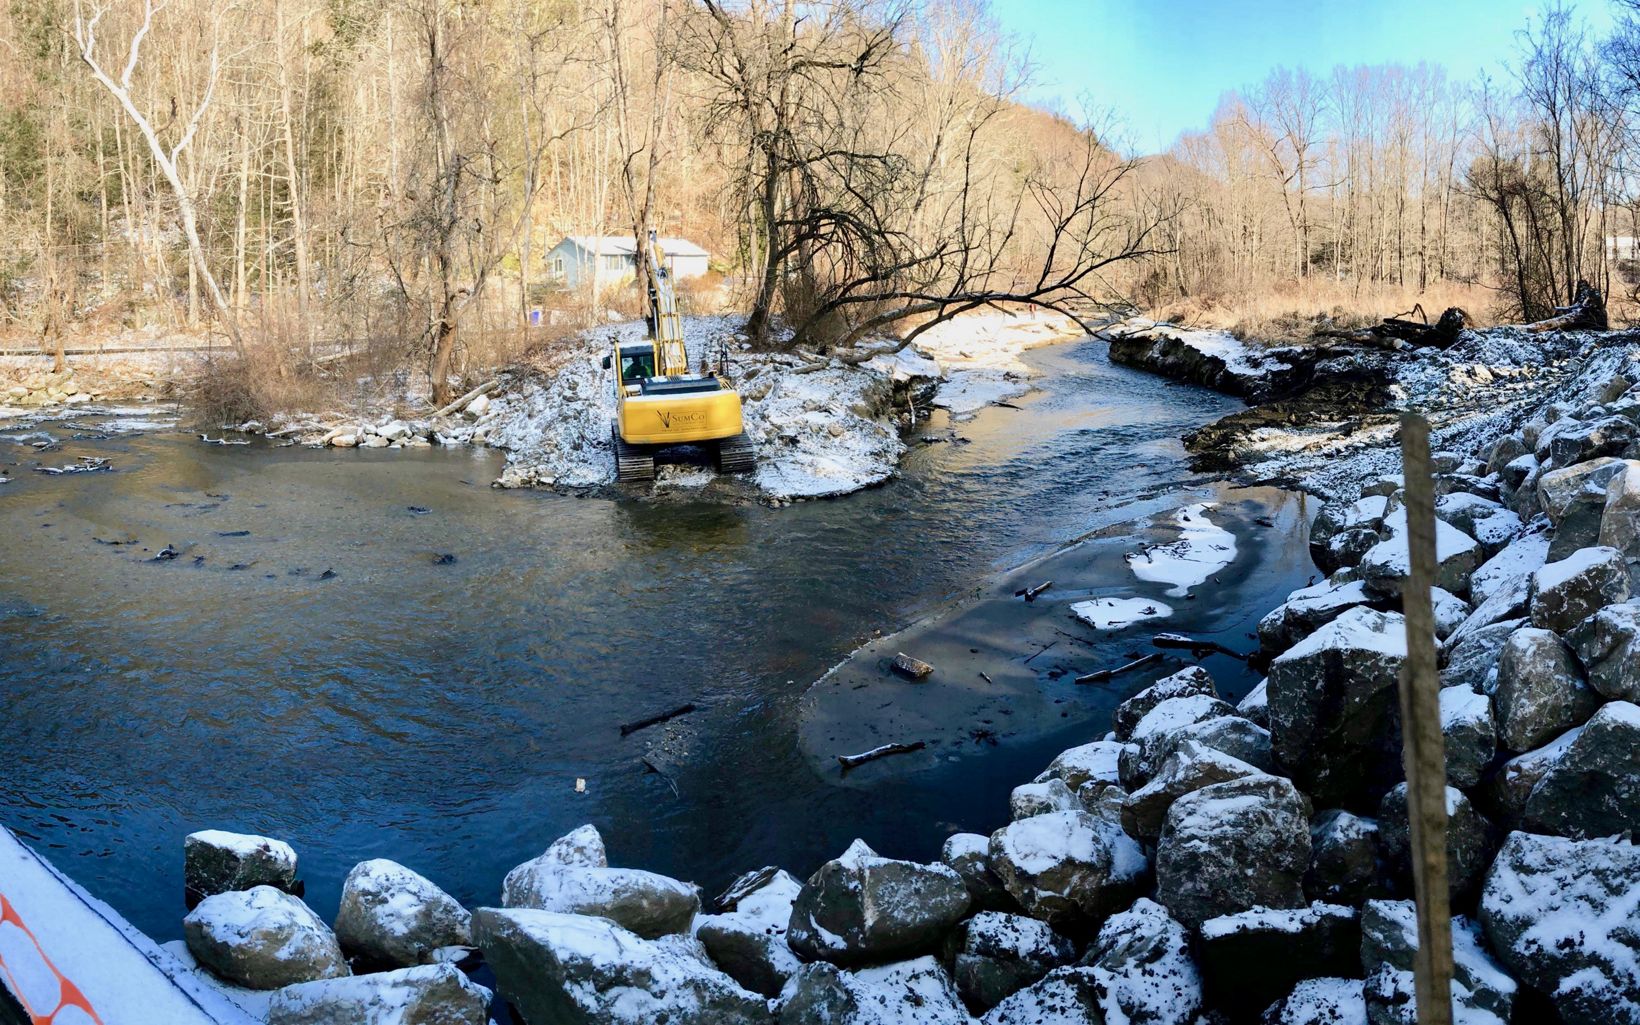 
                
                  Removal Nearly Complete With removal nearly complete, work begins on stream banks and habitat features. 
                  © Sally Harold/The Nature Conservancy
                
              